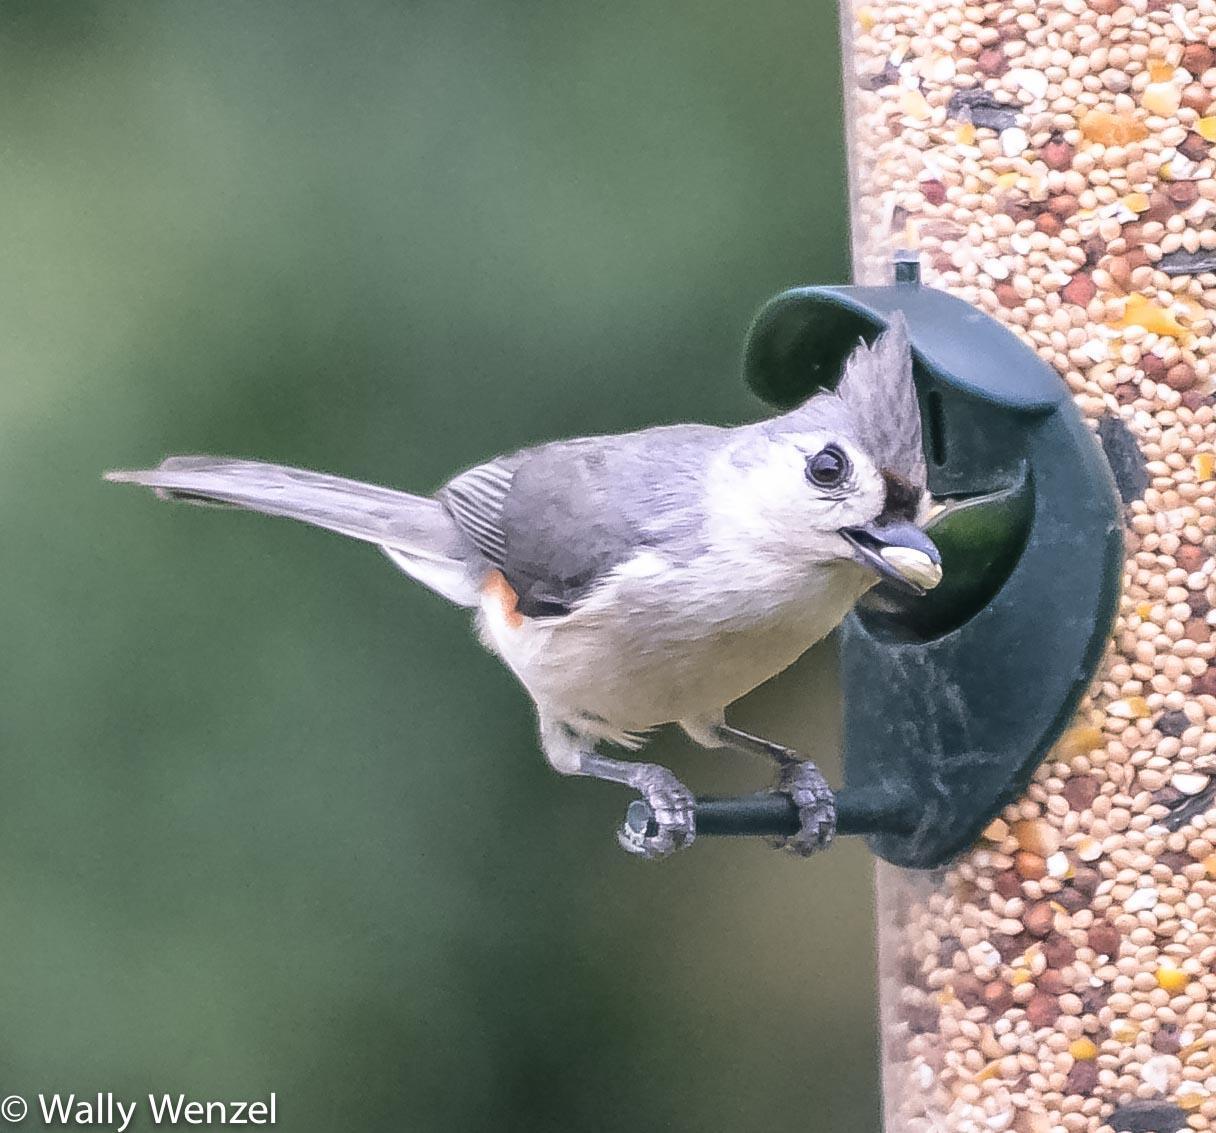 Tufted Titmouse Photo by Wally Wenzel